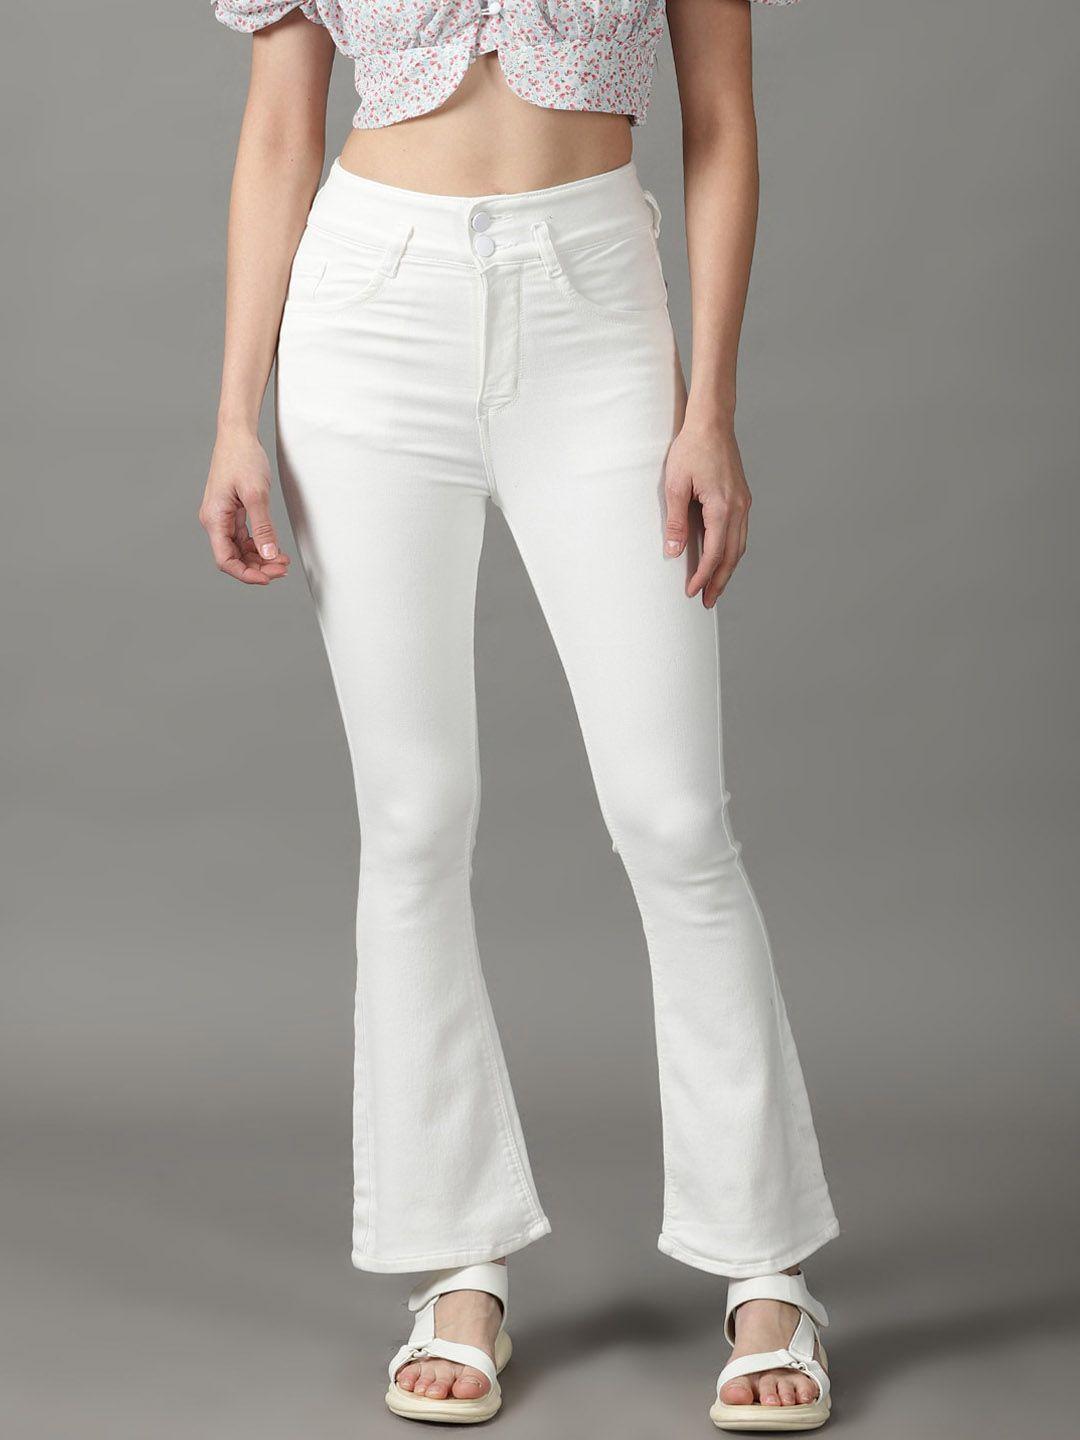 showoff-women-bootcut-high-rise-stretchable-jeans